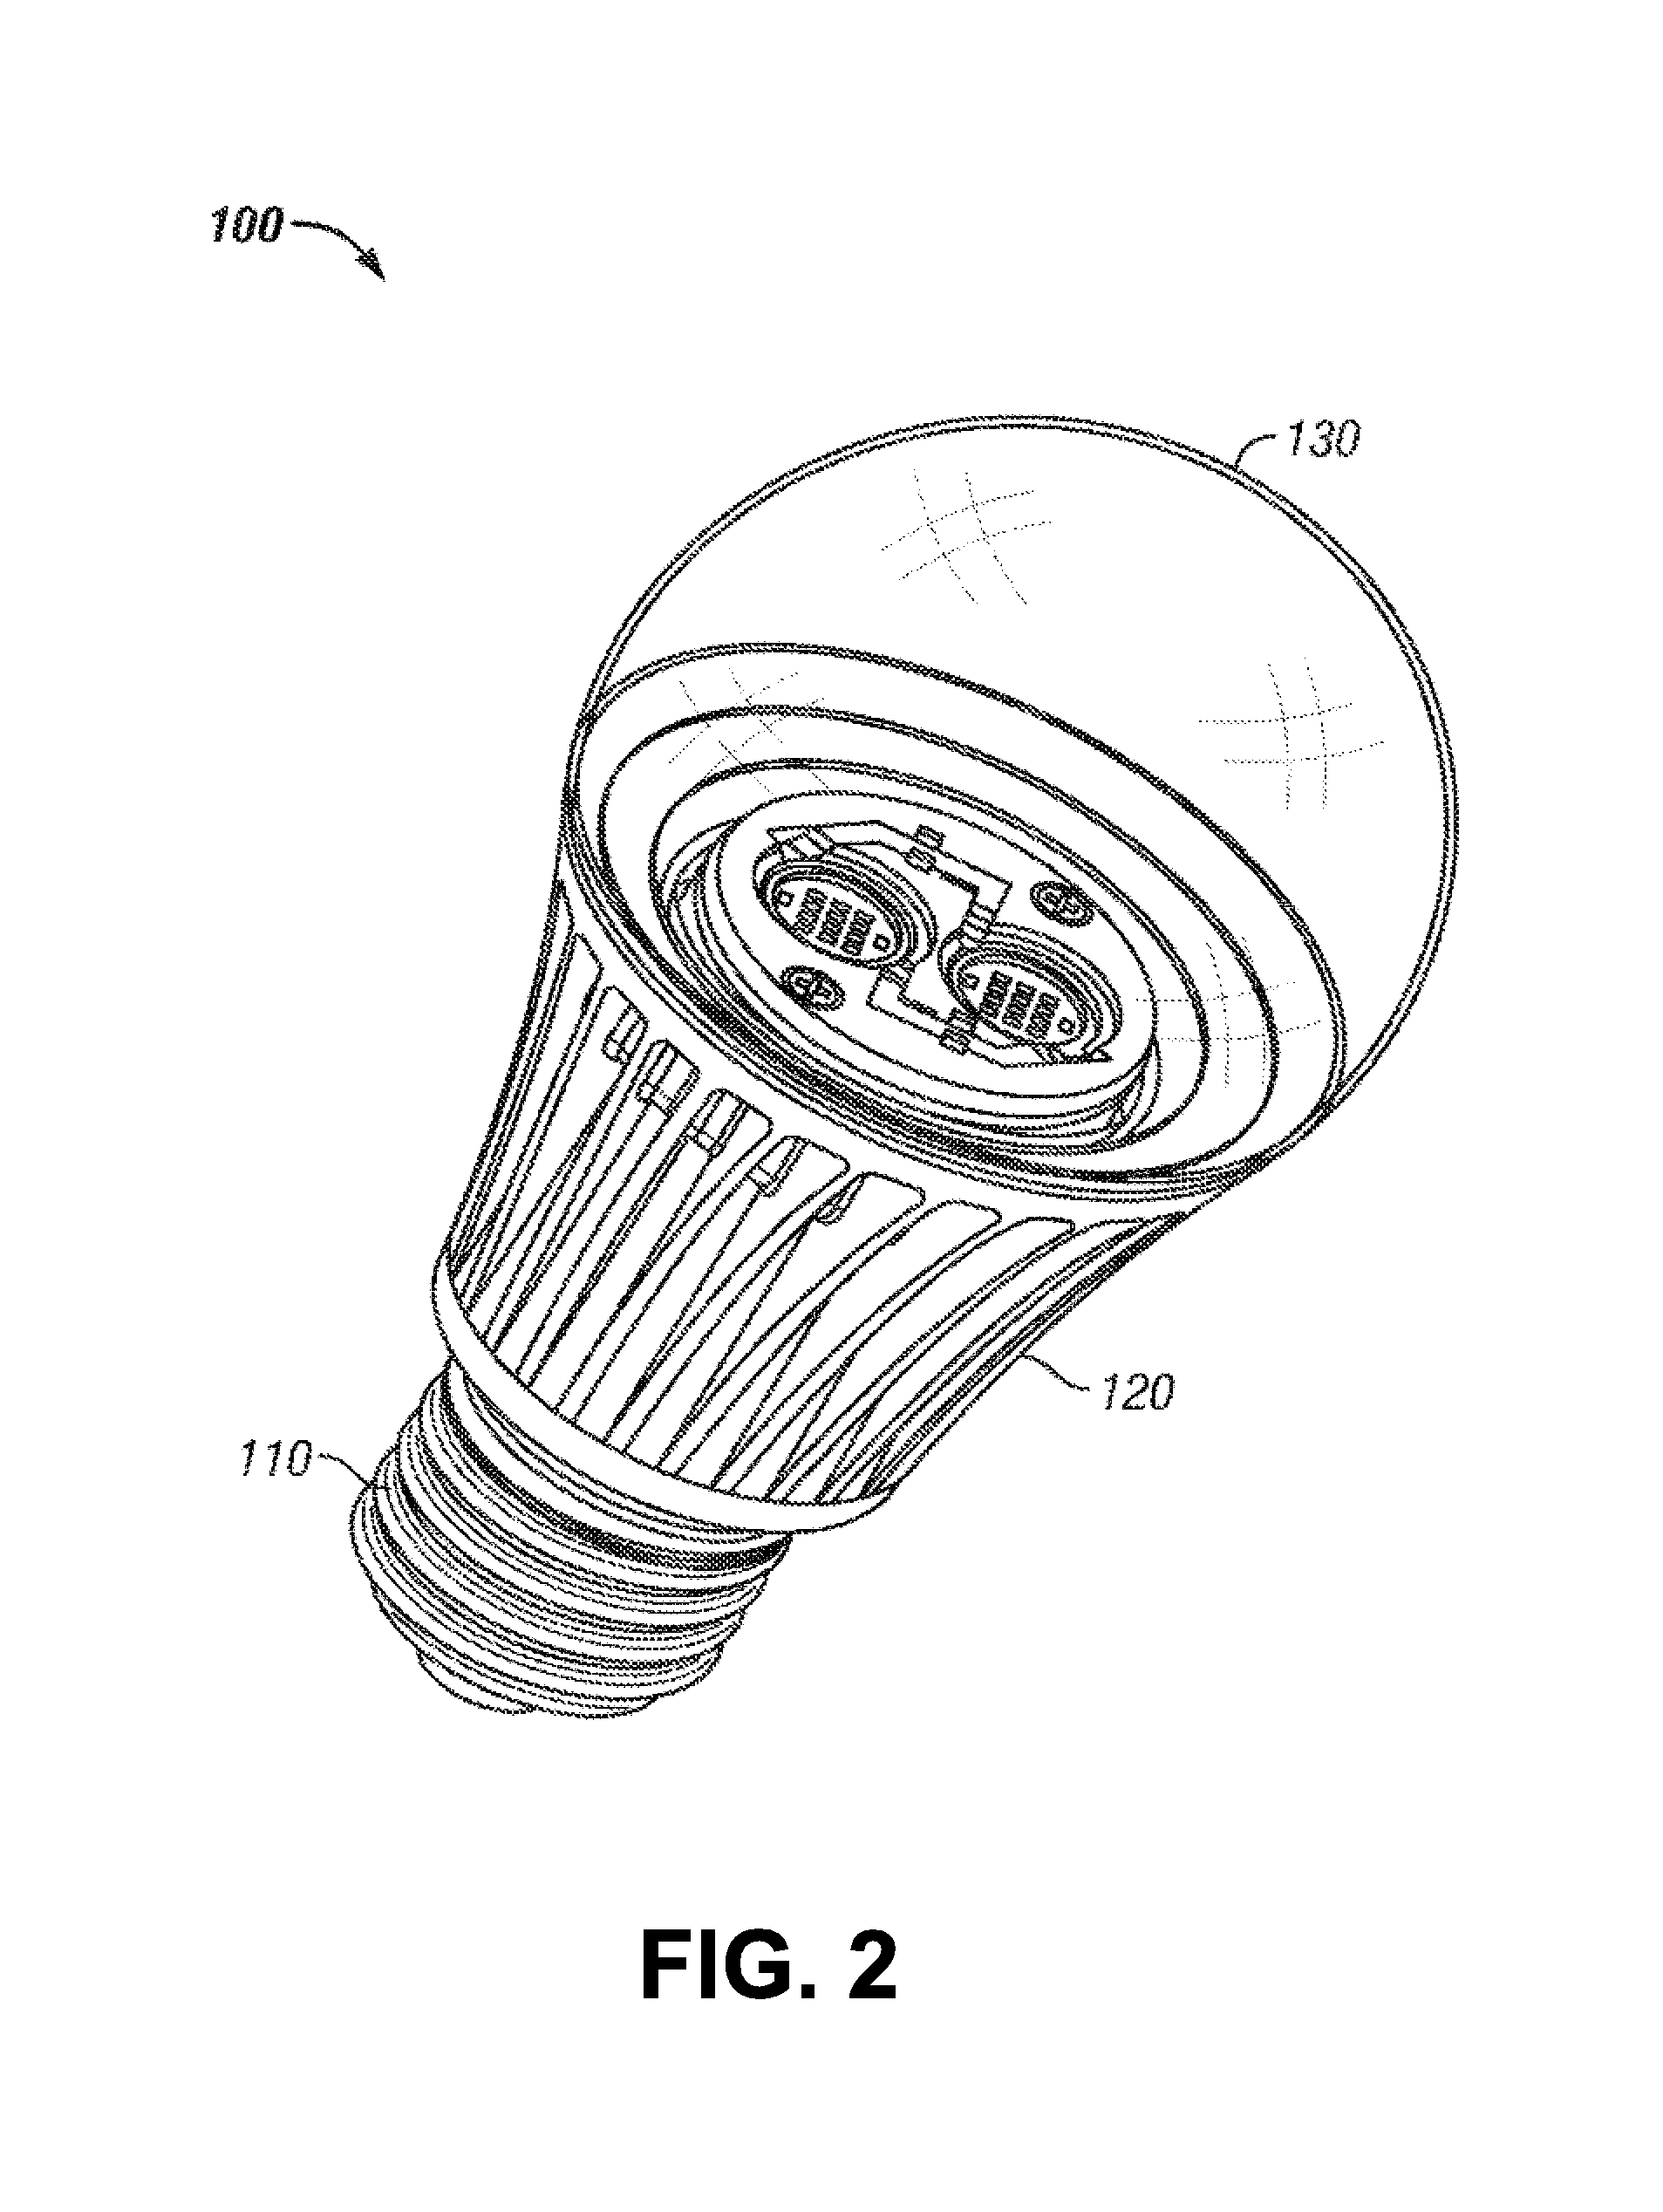 Tunable LED lamp for producing biologically-adjusted light